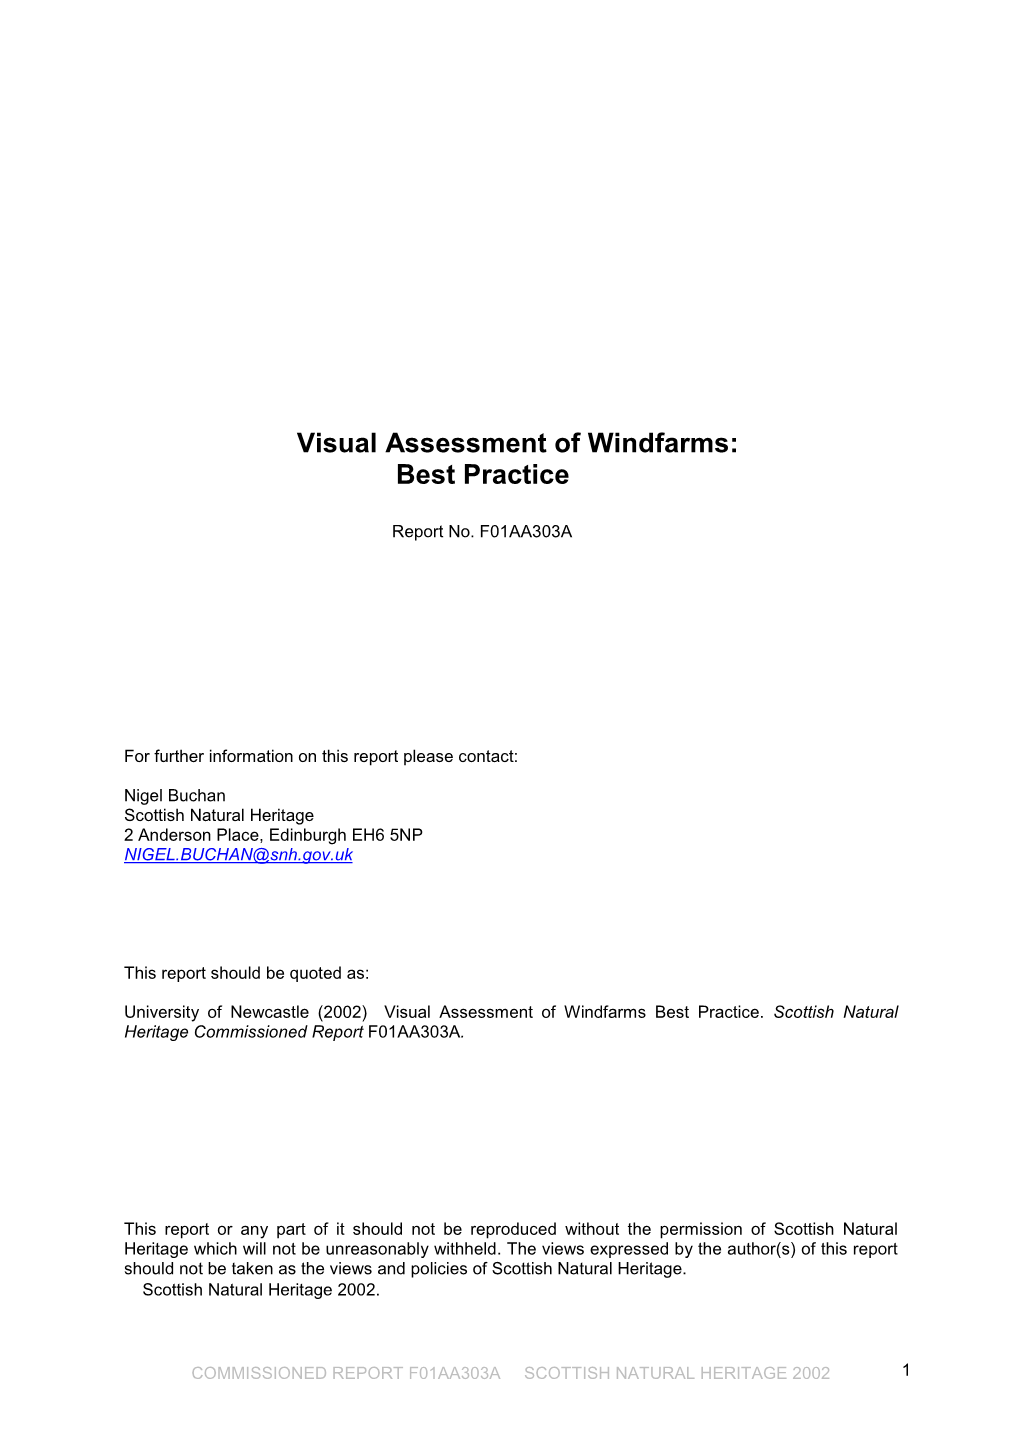 Visual Assessment of Windfarms: Best Practice